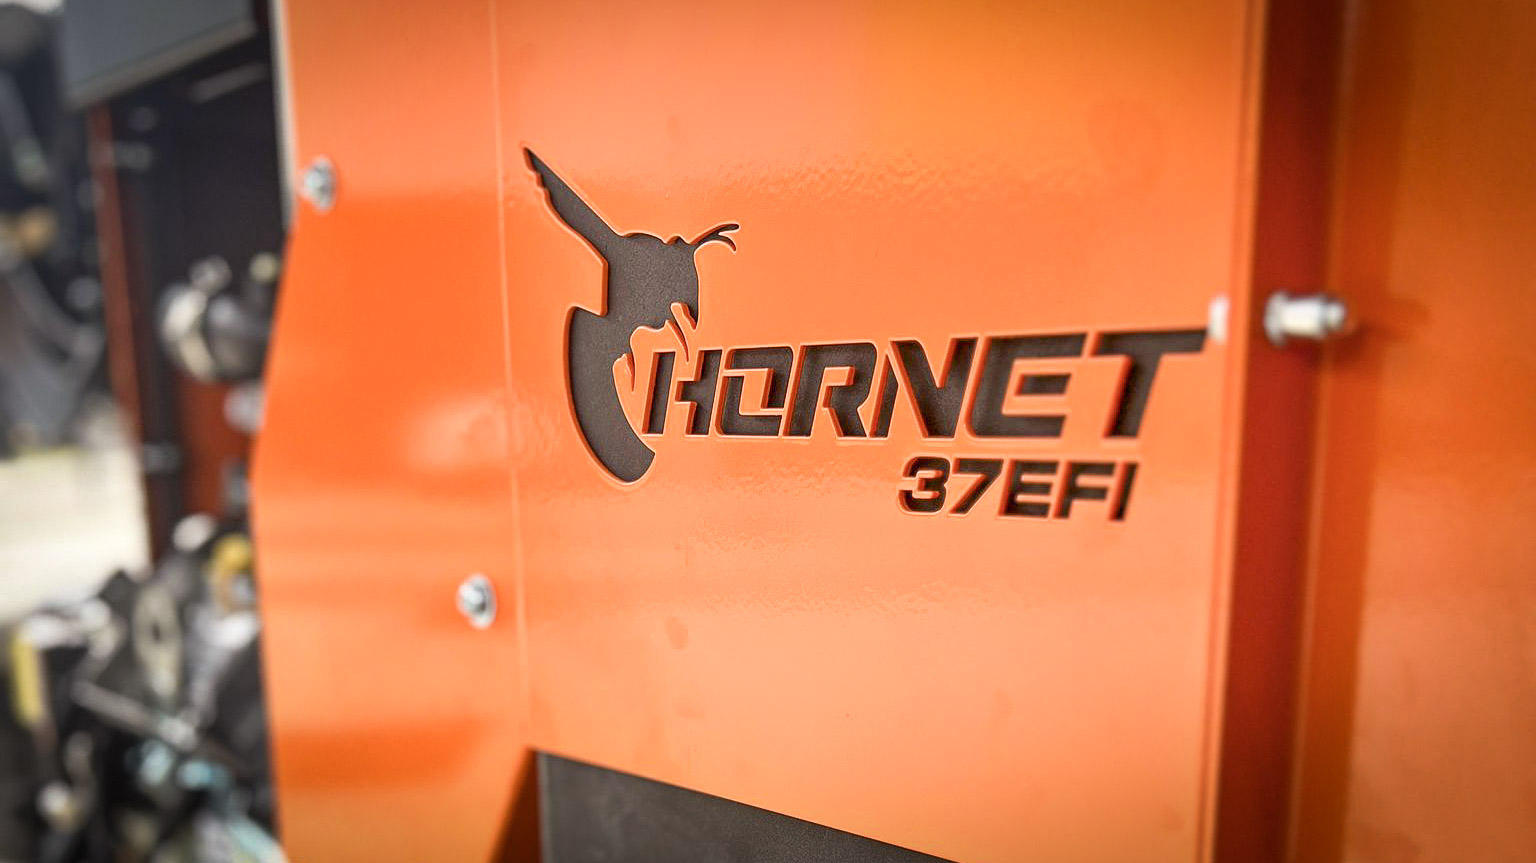 The new hornet powerful water jetter